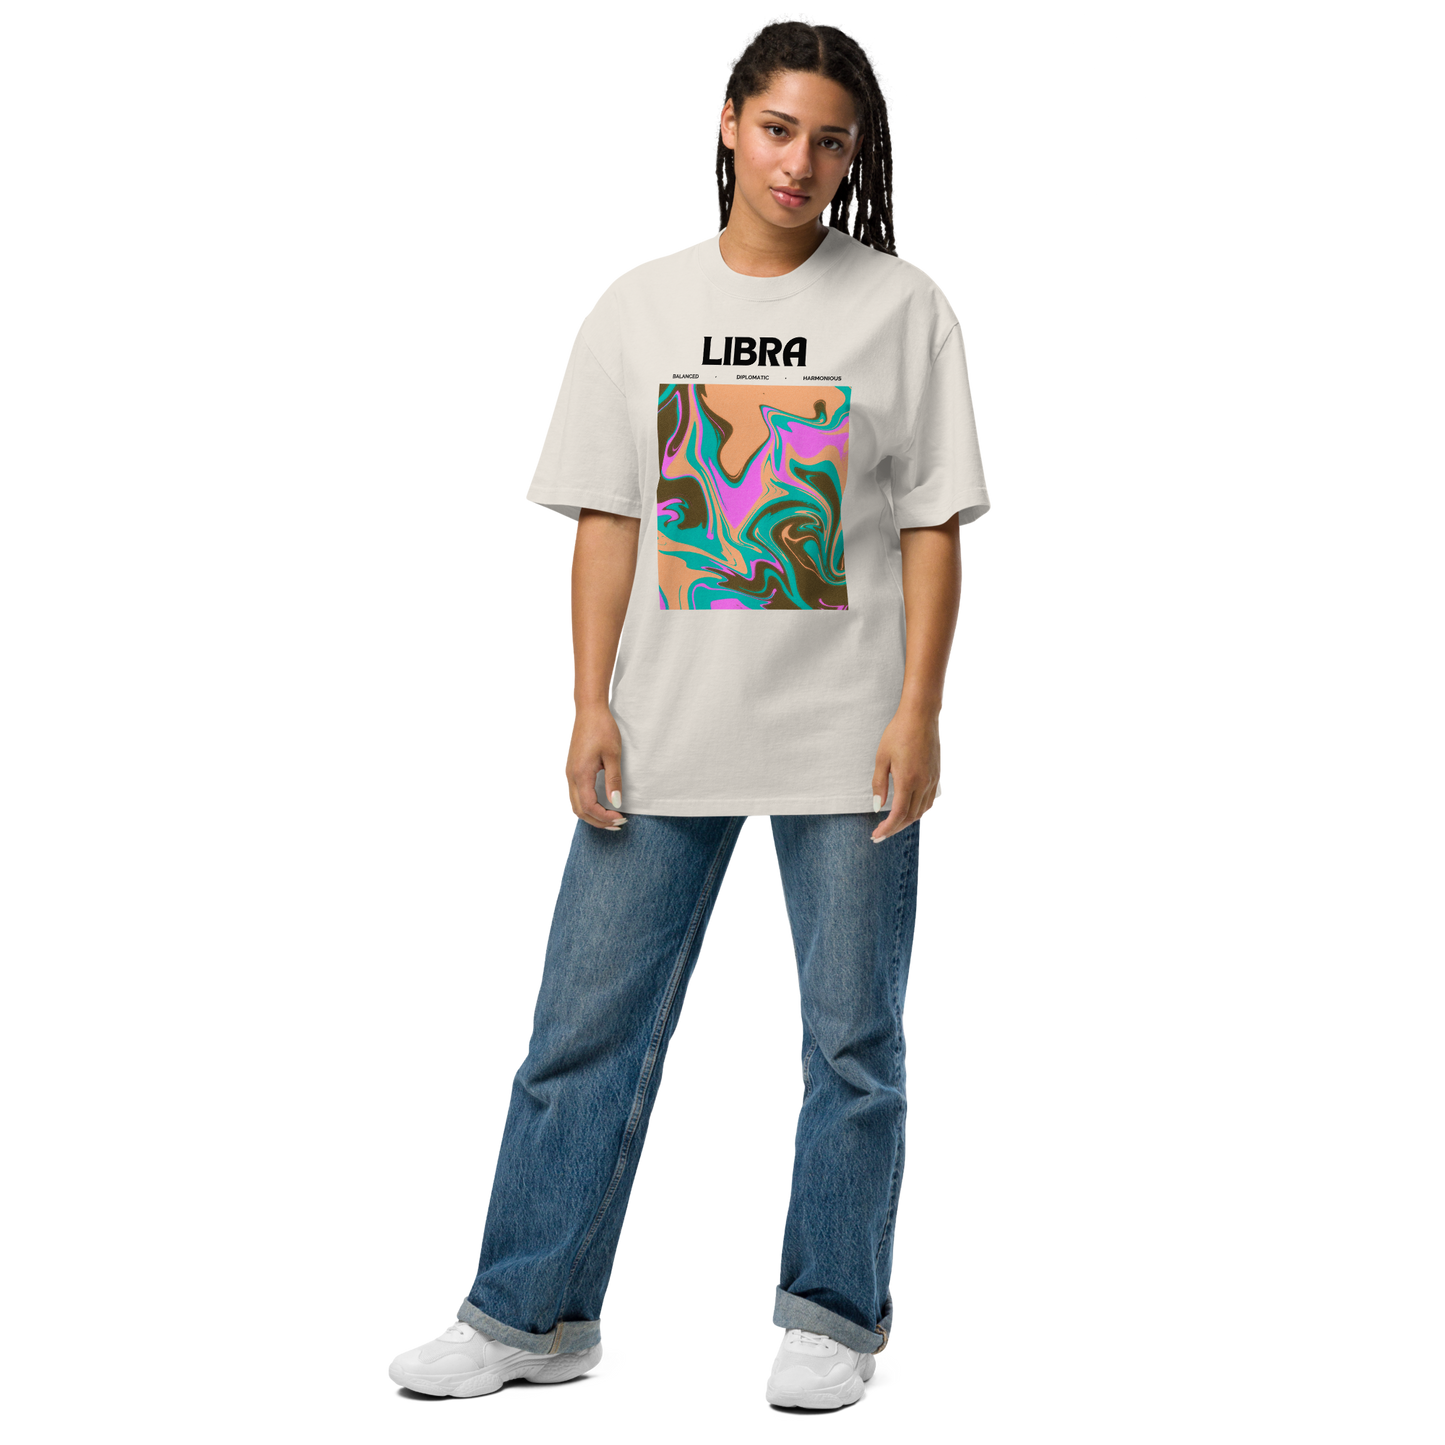 Woman wearing a Faded Bone Libra Oversized T-Shirt featuring an Abstract Libra Star Sign graphic on the chest - Cool Graphic Zodiac Oversized Tees - Boozy Fox